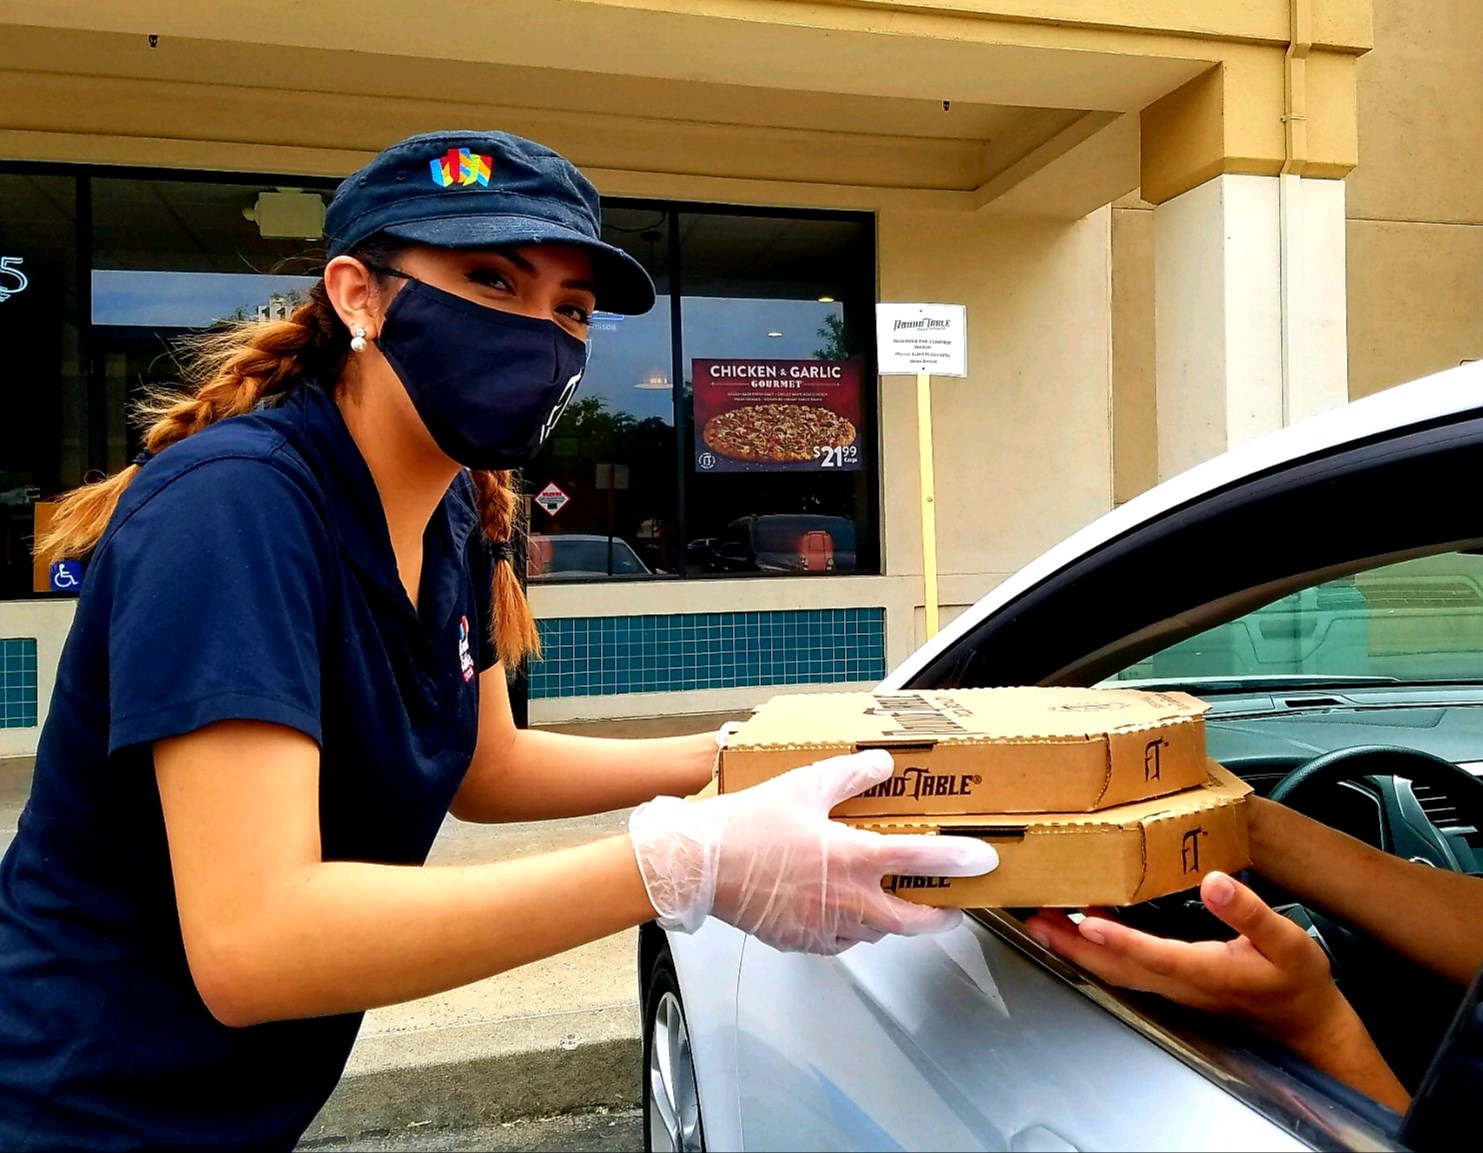 A young lady hand pizza to customers